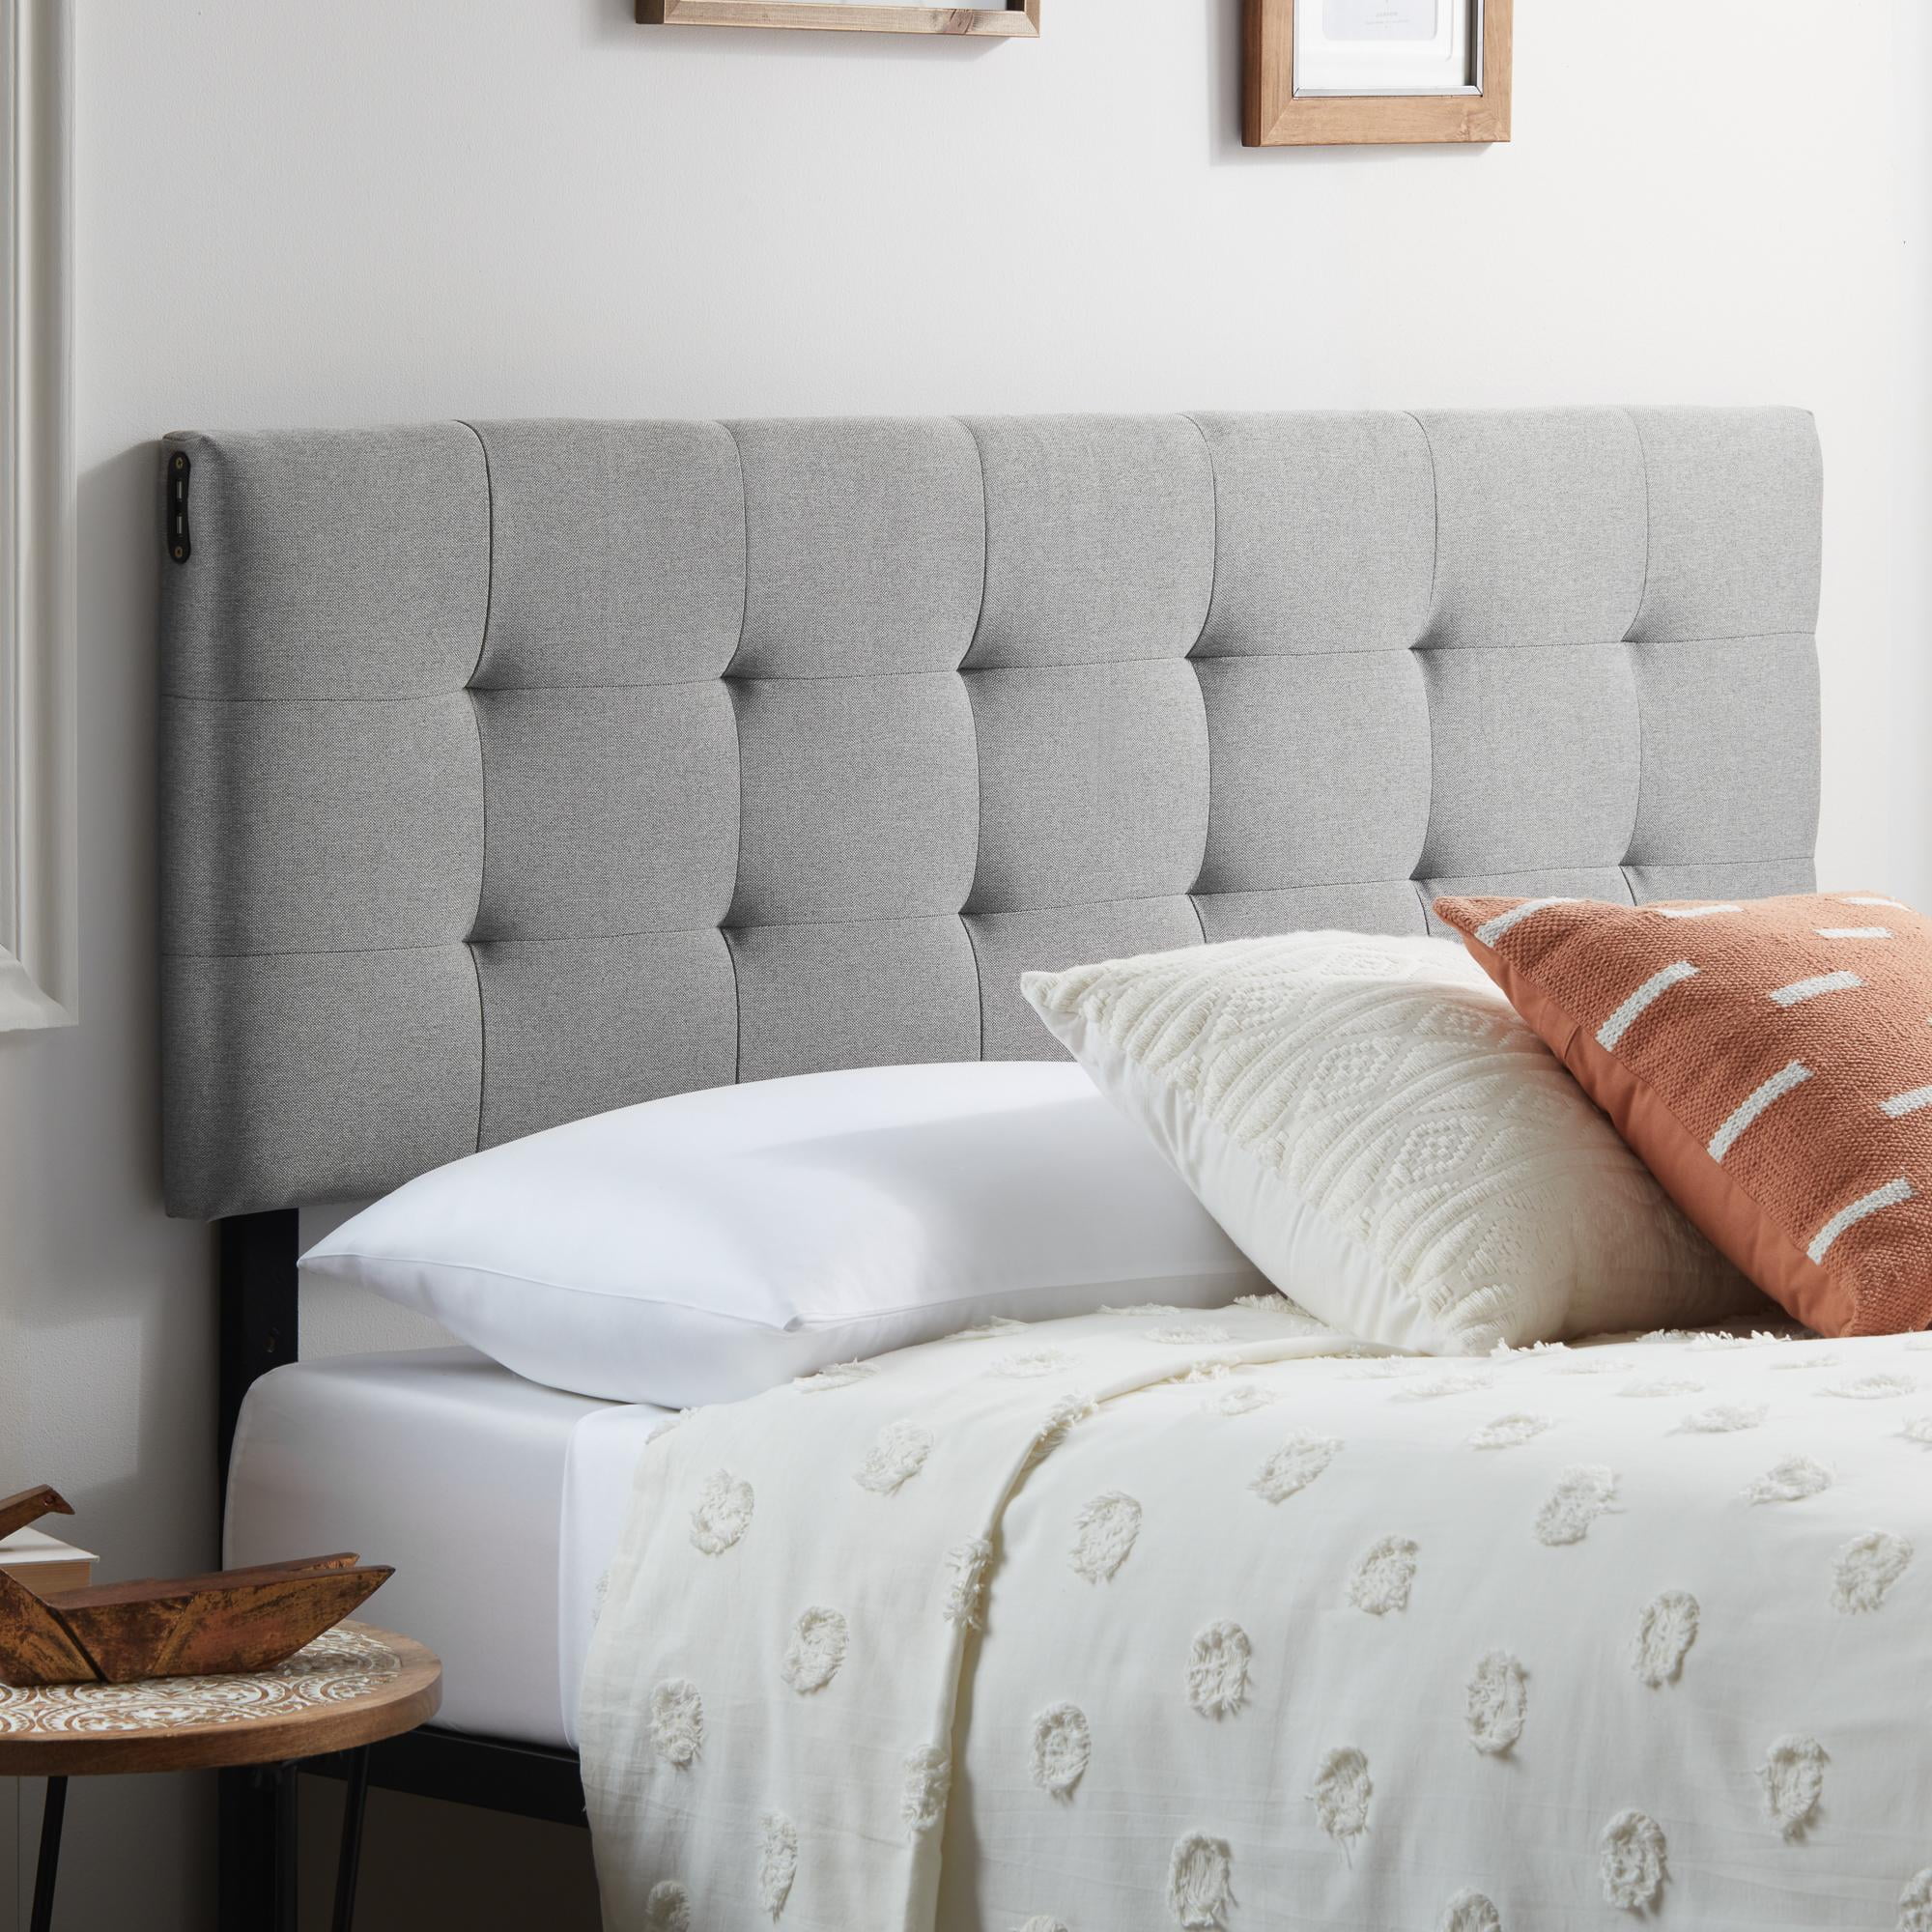 Rest Haven Upholstered Square Tufted, Grey Padded Headboard King